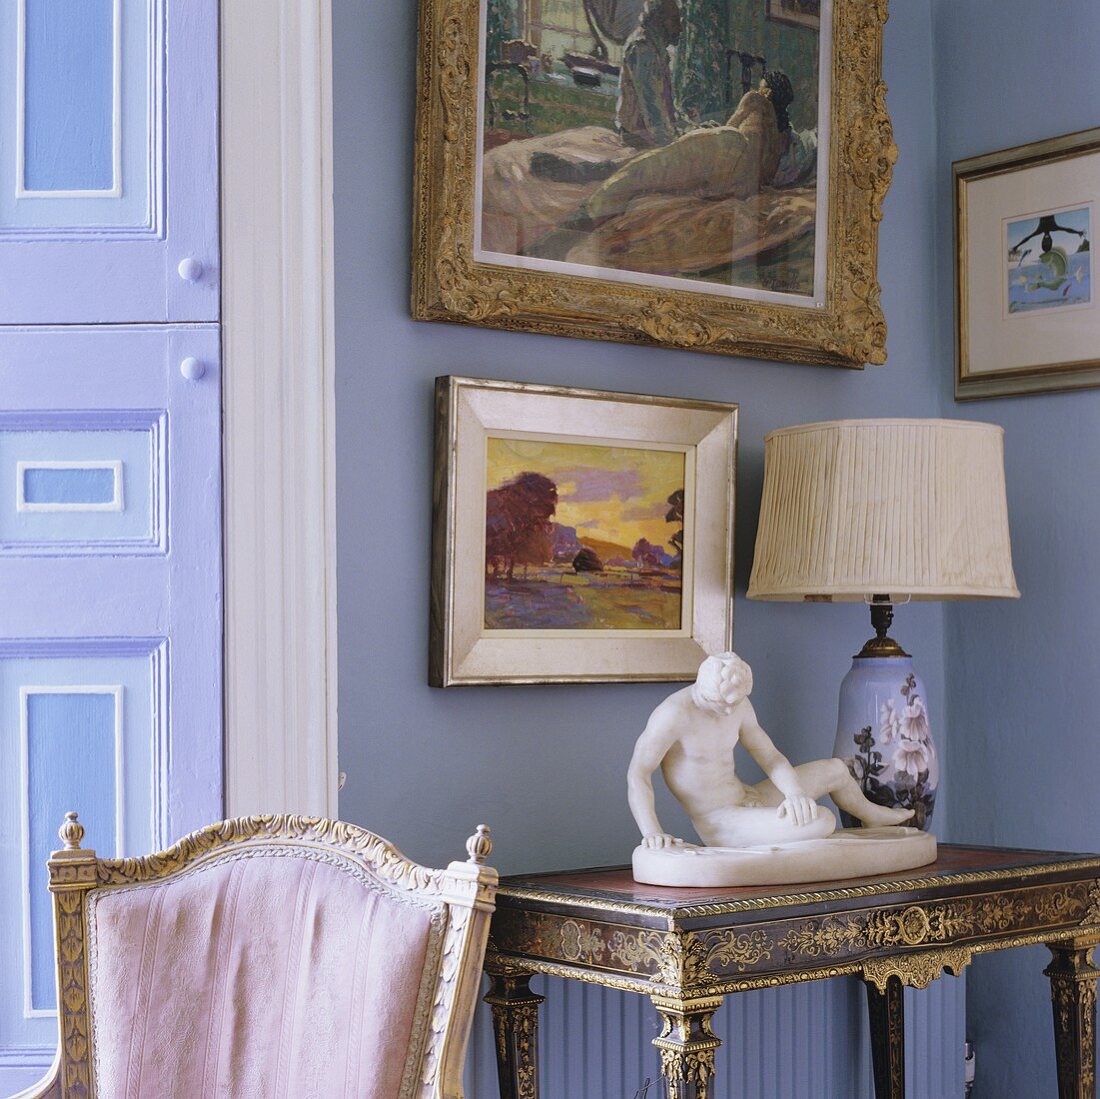 A sculpture and a table lamp with a white shade on an antique wall table and pictures hanging on a lilac-painted wall